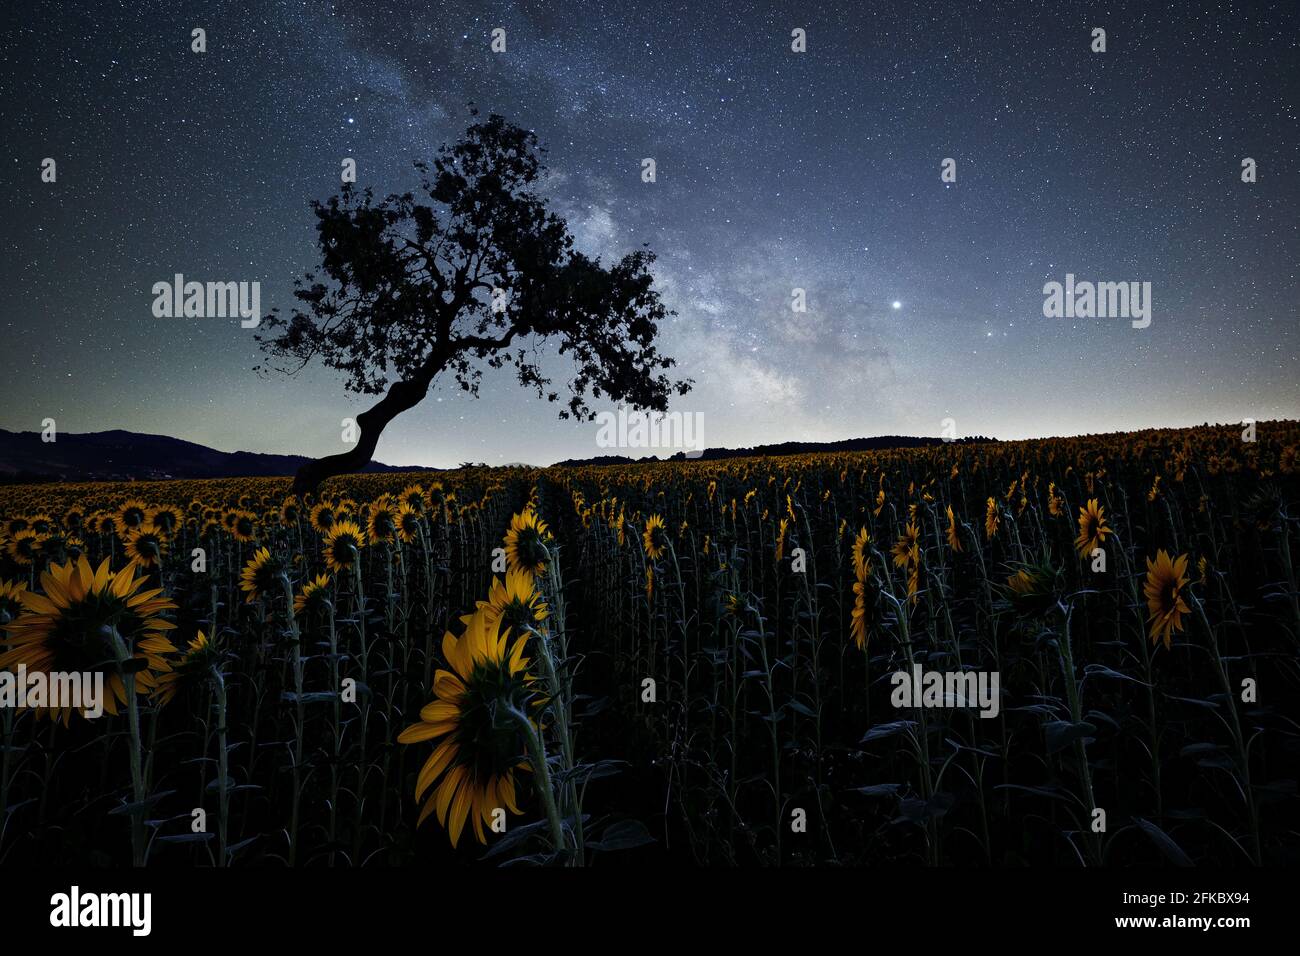 Milky Way above a sunflowers field with a bent tree silhouette, Emilia Romagna, Italy, Europe Stock Photo